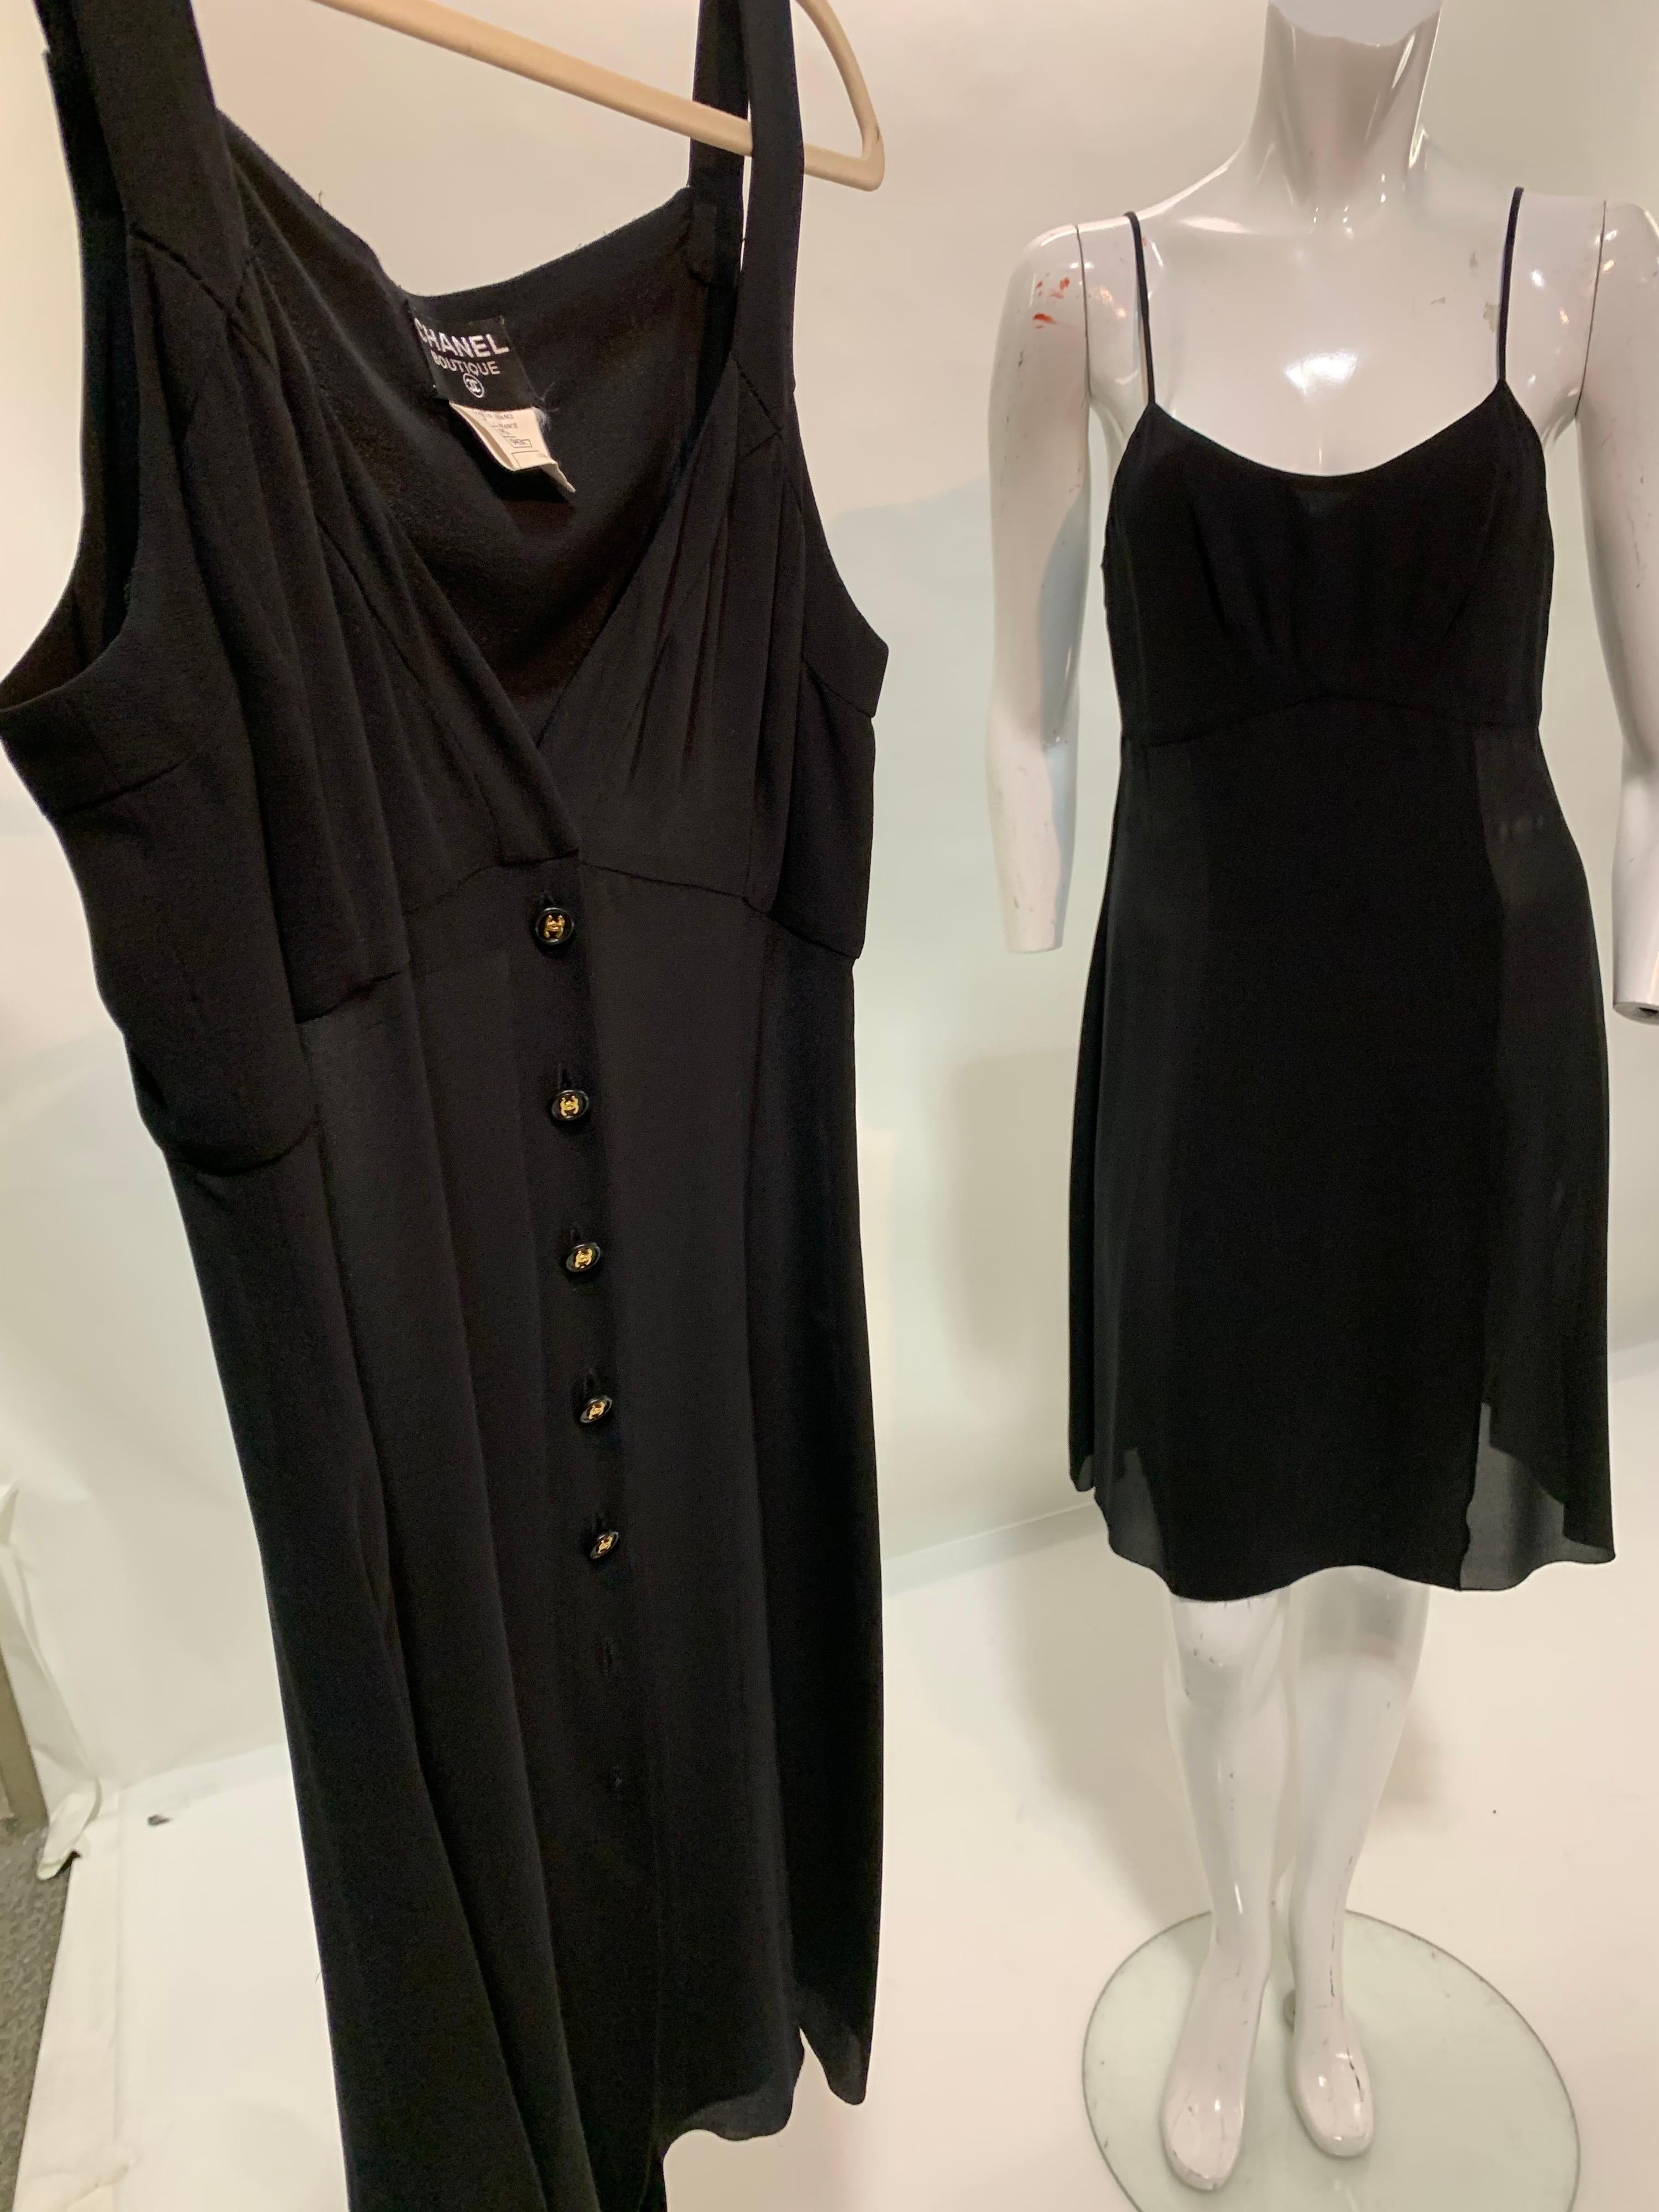 1997 Chanel by Lagerfeld Black 2-Piece Slip and Button Down Crepe Dress Ensemble 3